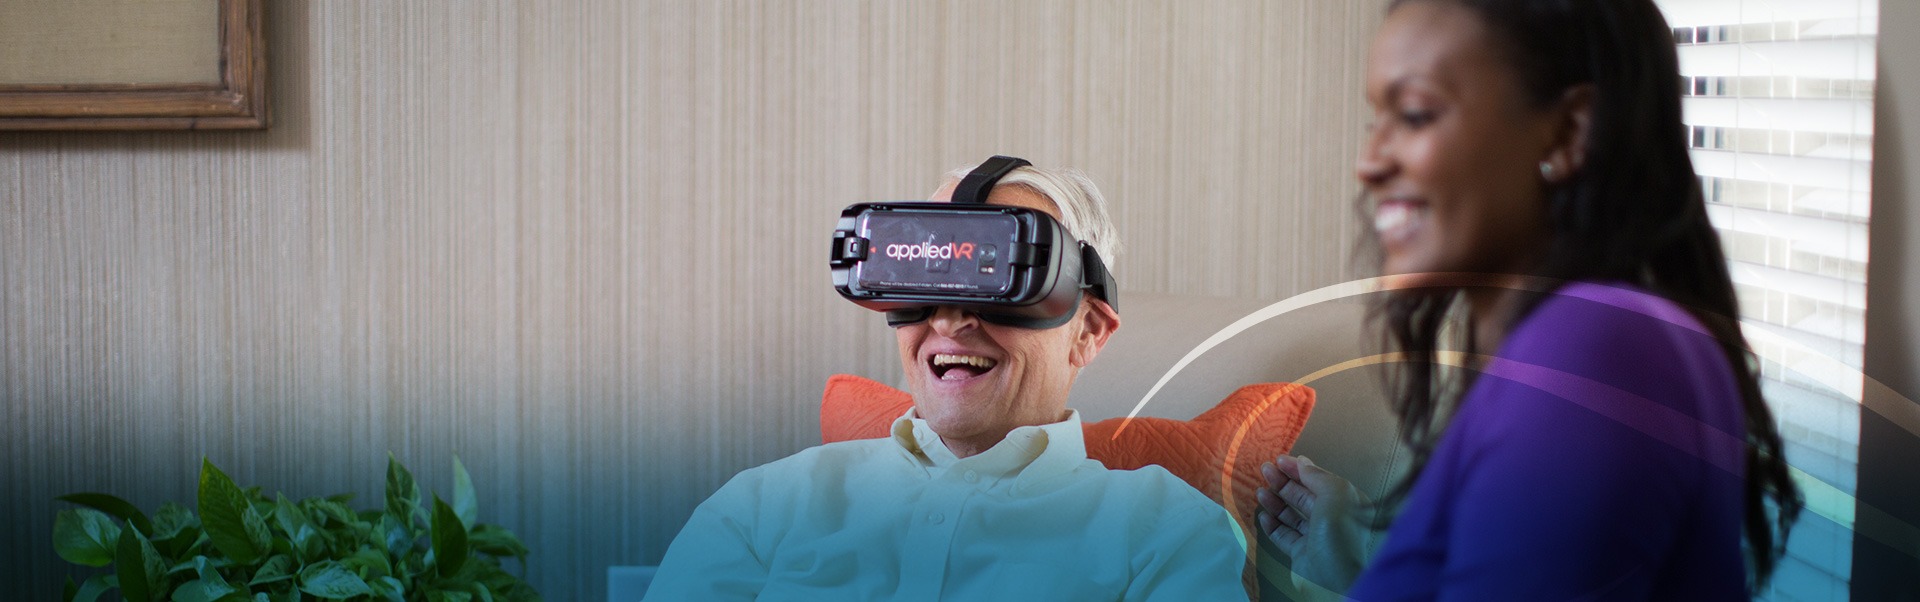 Man smiling and wearing Applied VR headset as part of neurological care